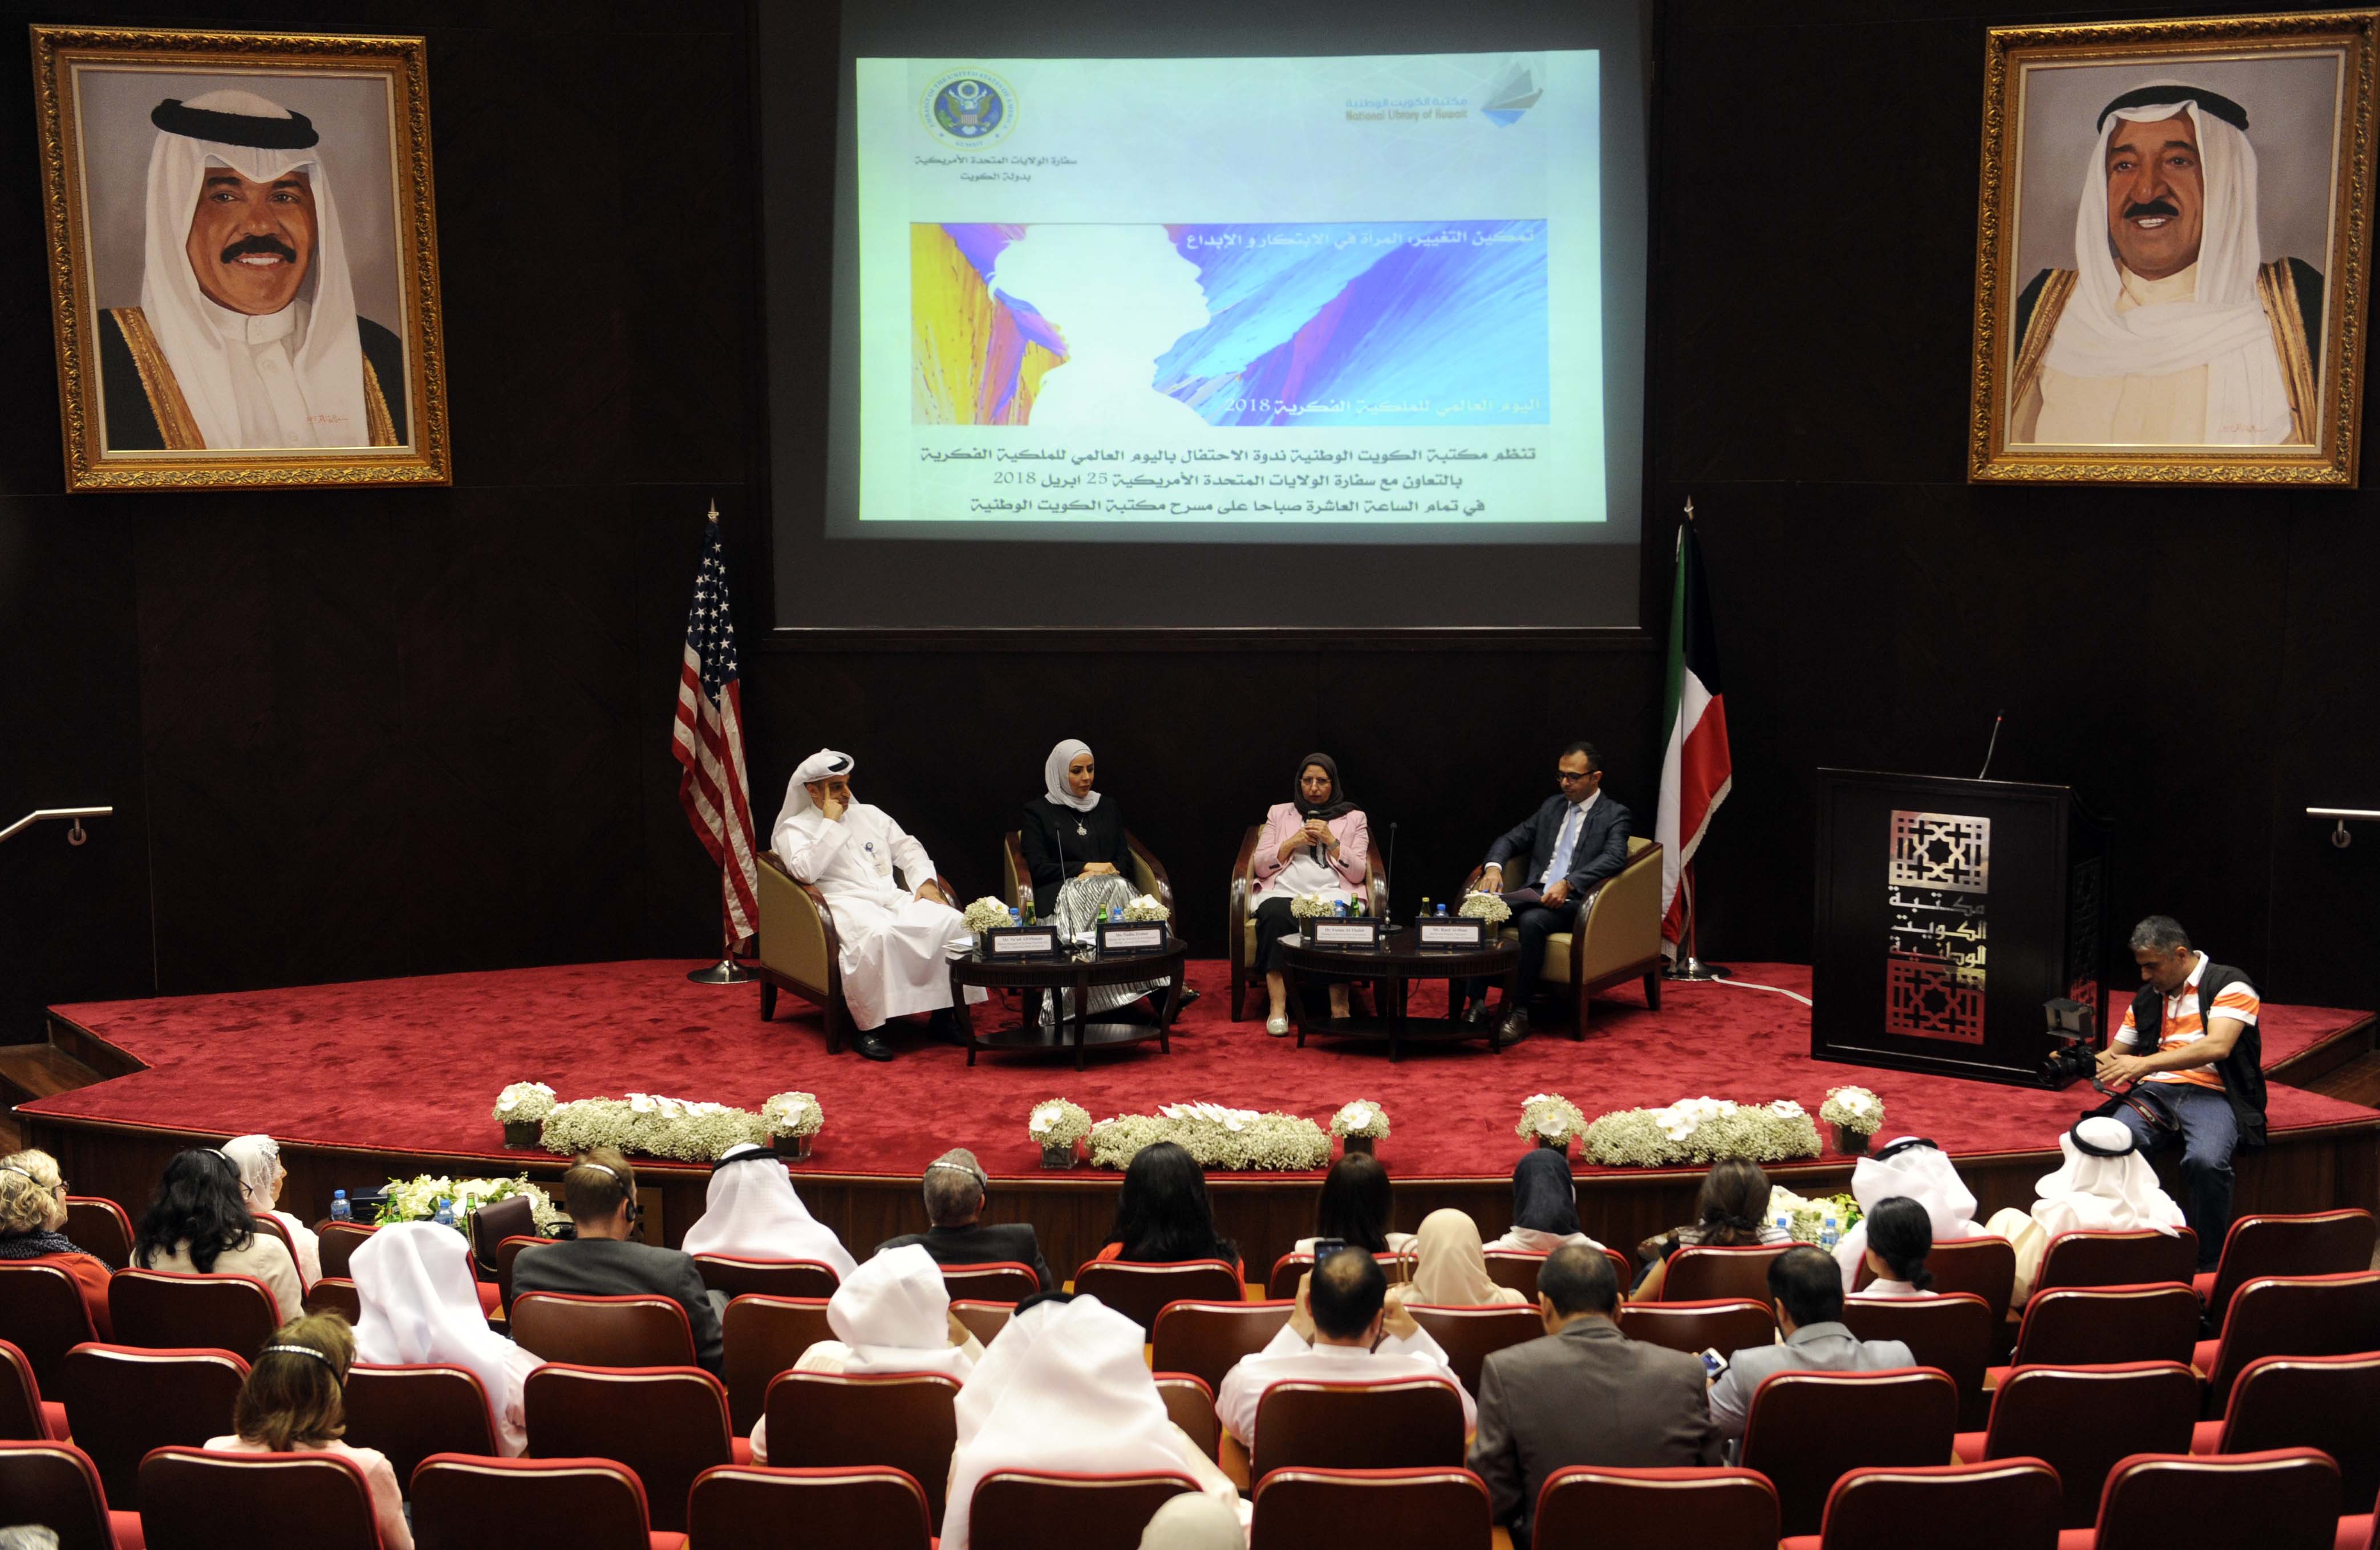 The National Library of Kuwait hostes a seminar, co-organized with the US embassy, on the theme of empowering women in innovation and creativity